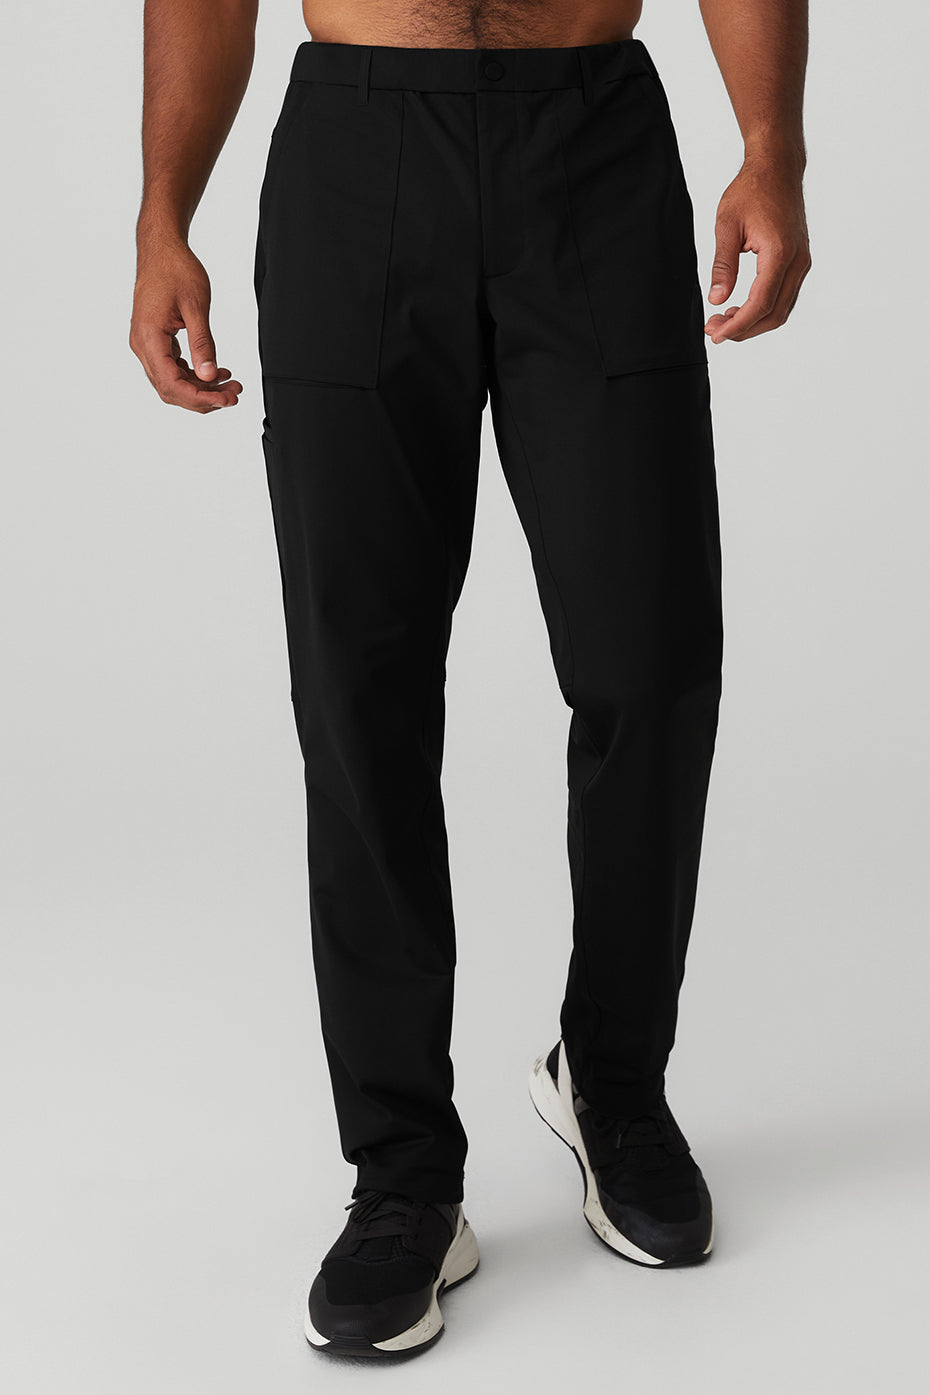 Alo Men's Conquer Pulse Pant – The Find